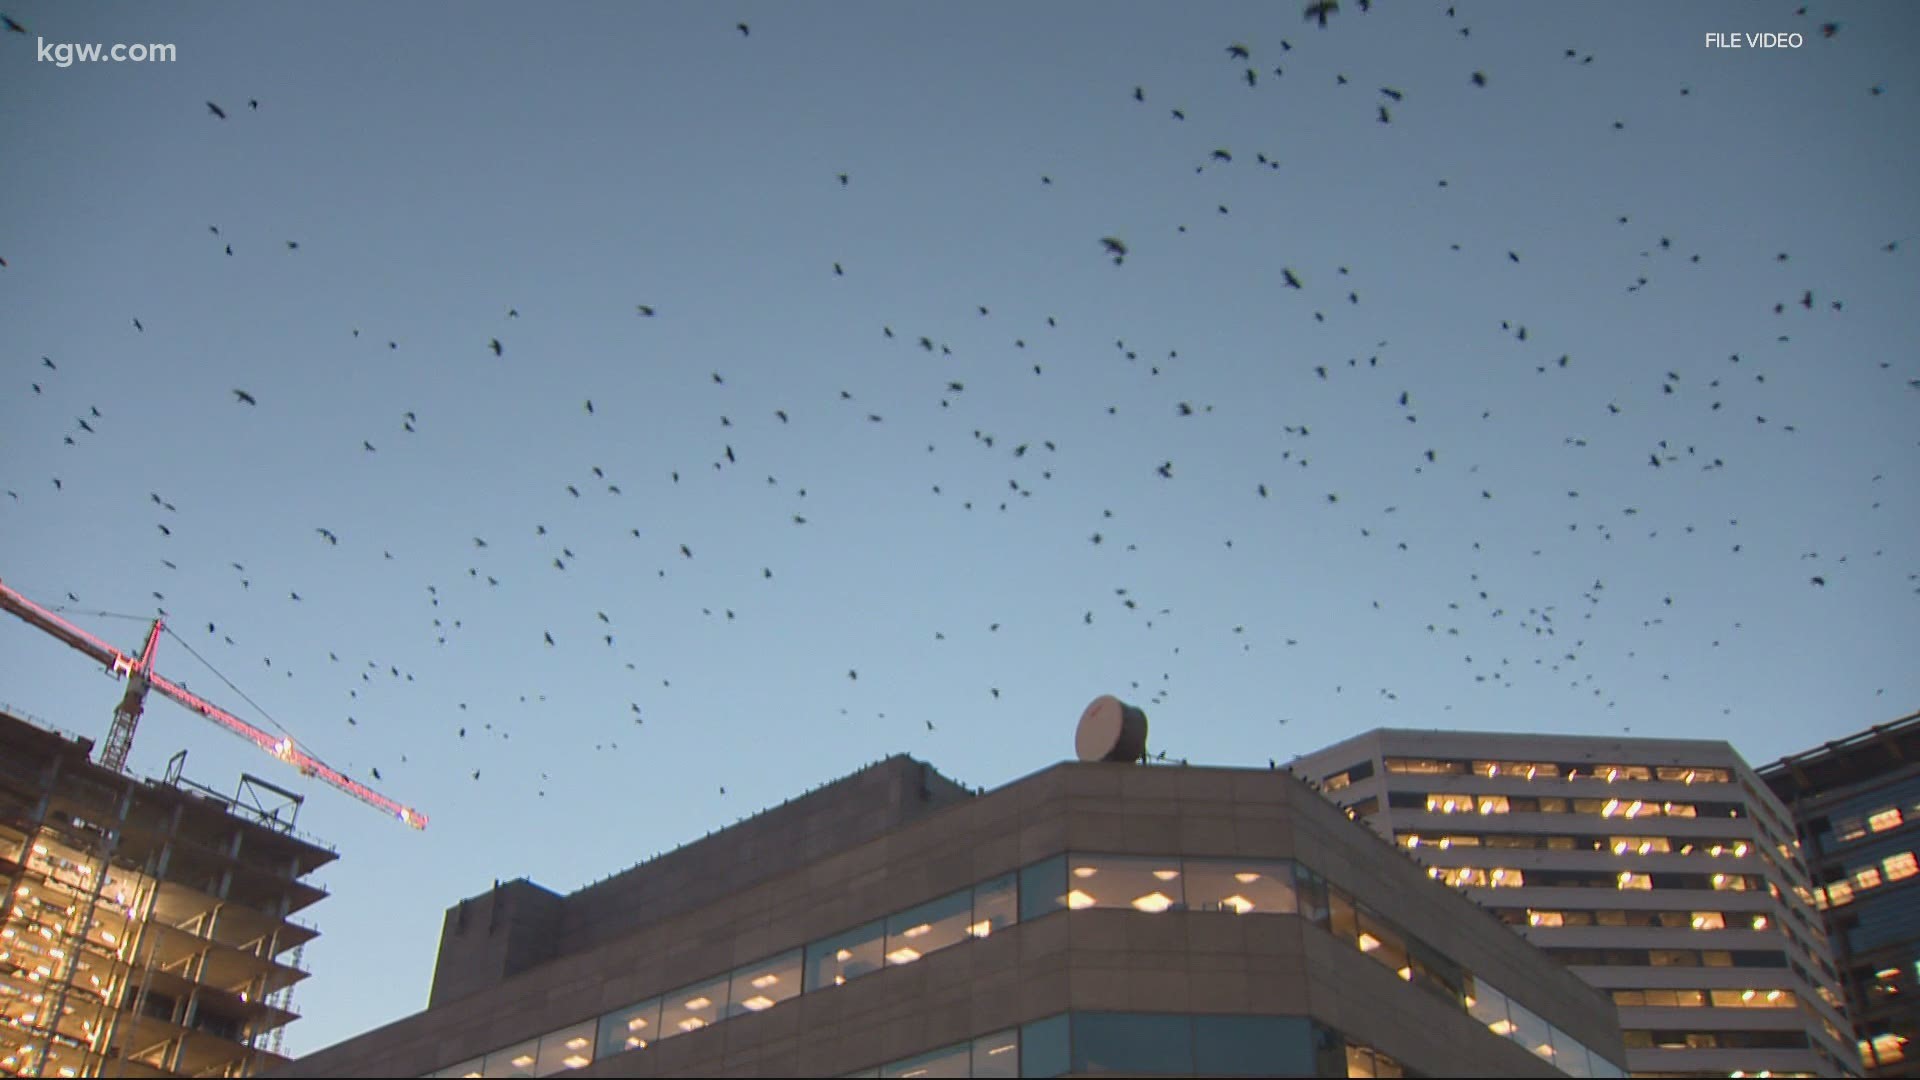 For the fourth year in a row, the city is bringing in hawks to clear crows from downtown Portland. Devon Haskins reports.